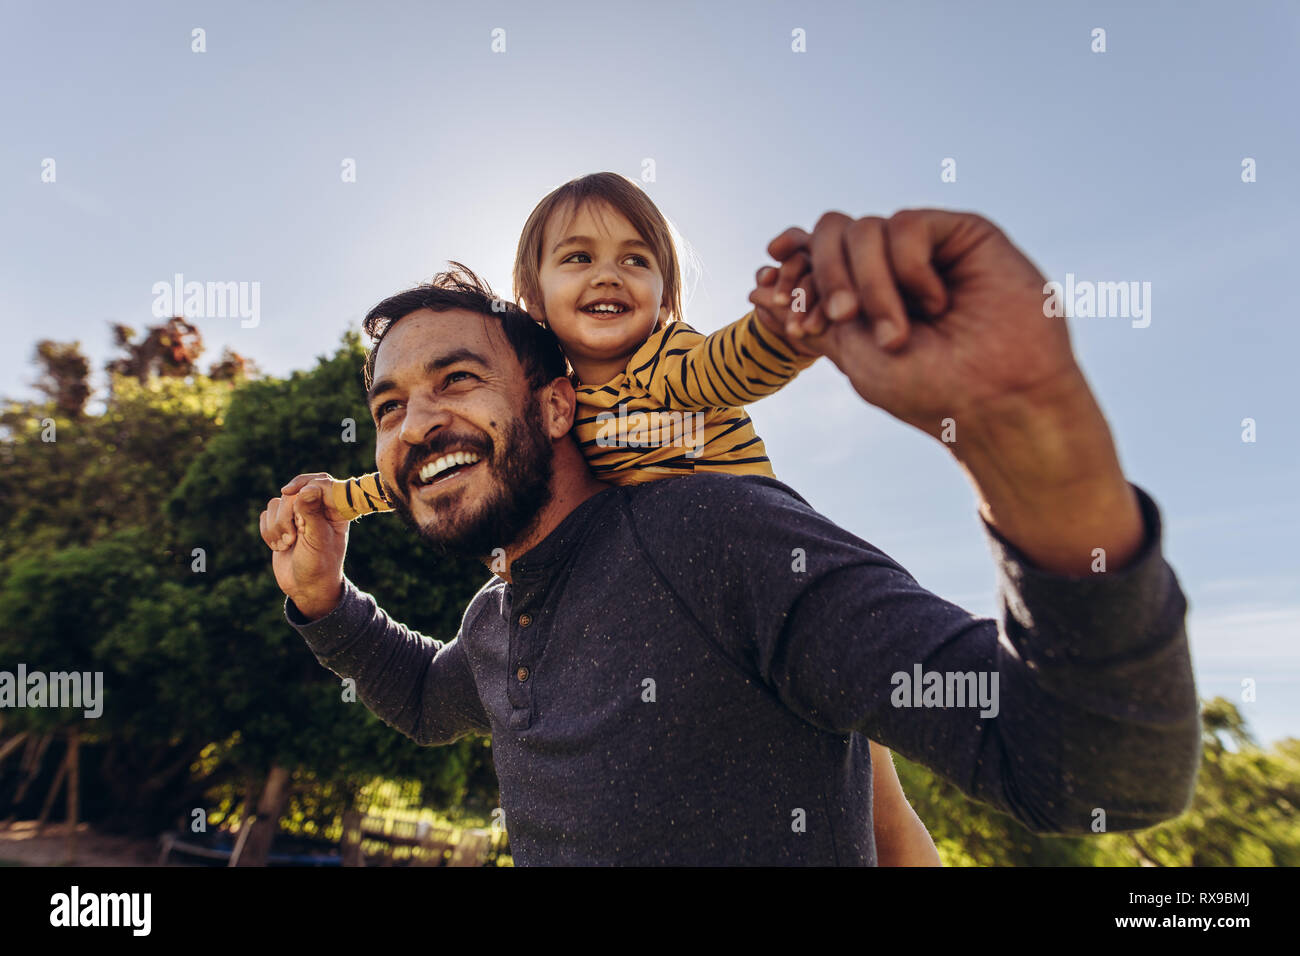 Close up of a man carrying his child on his back outdoors. Happy father walking outdoors with his kid on his back. Stock Photo